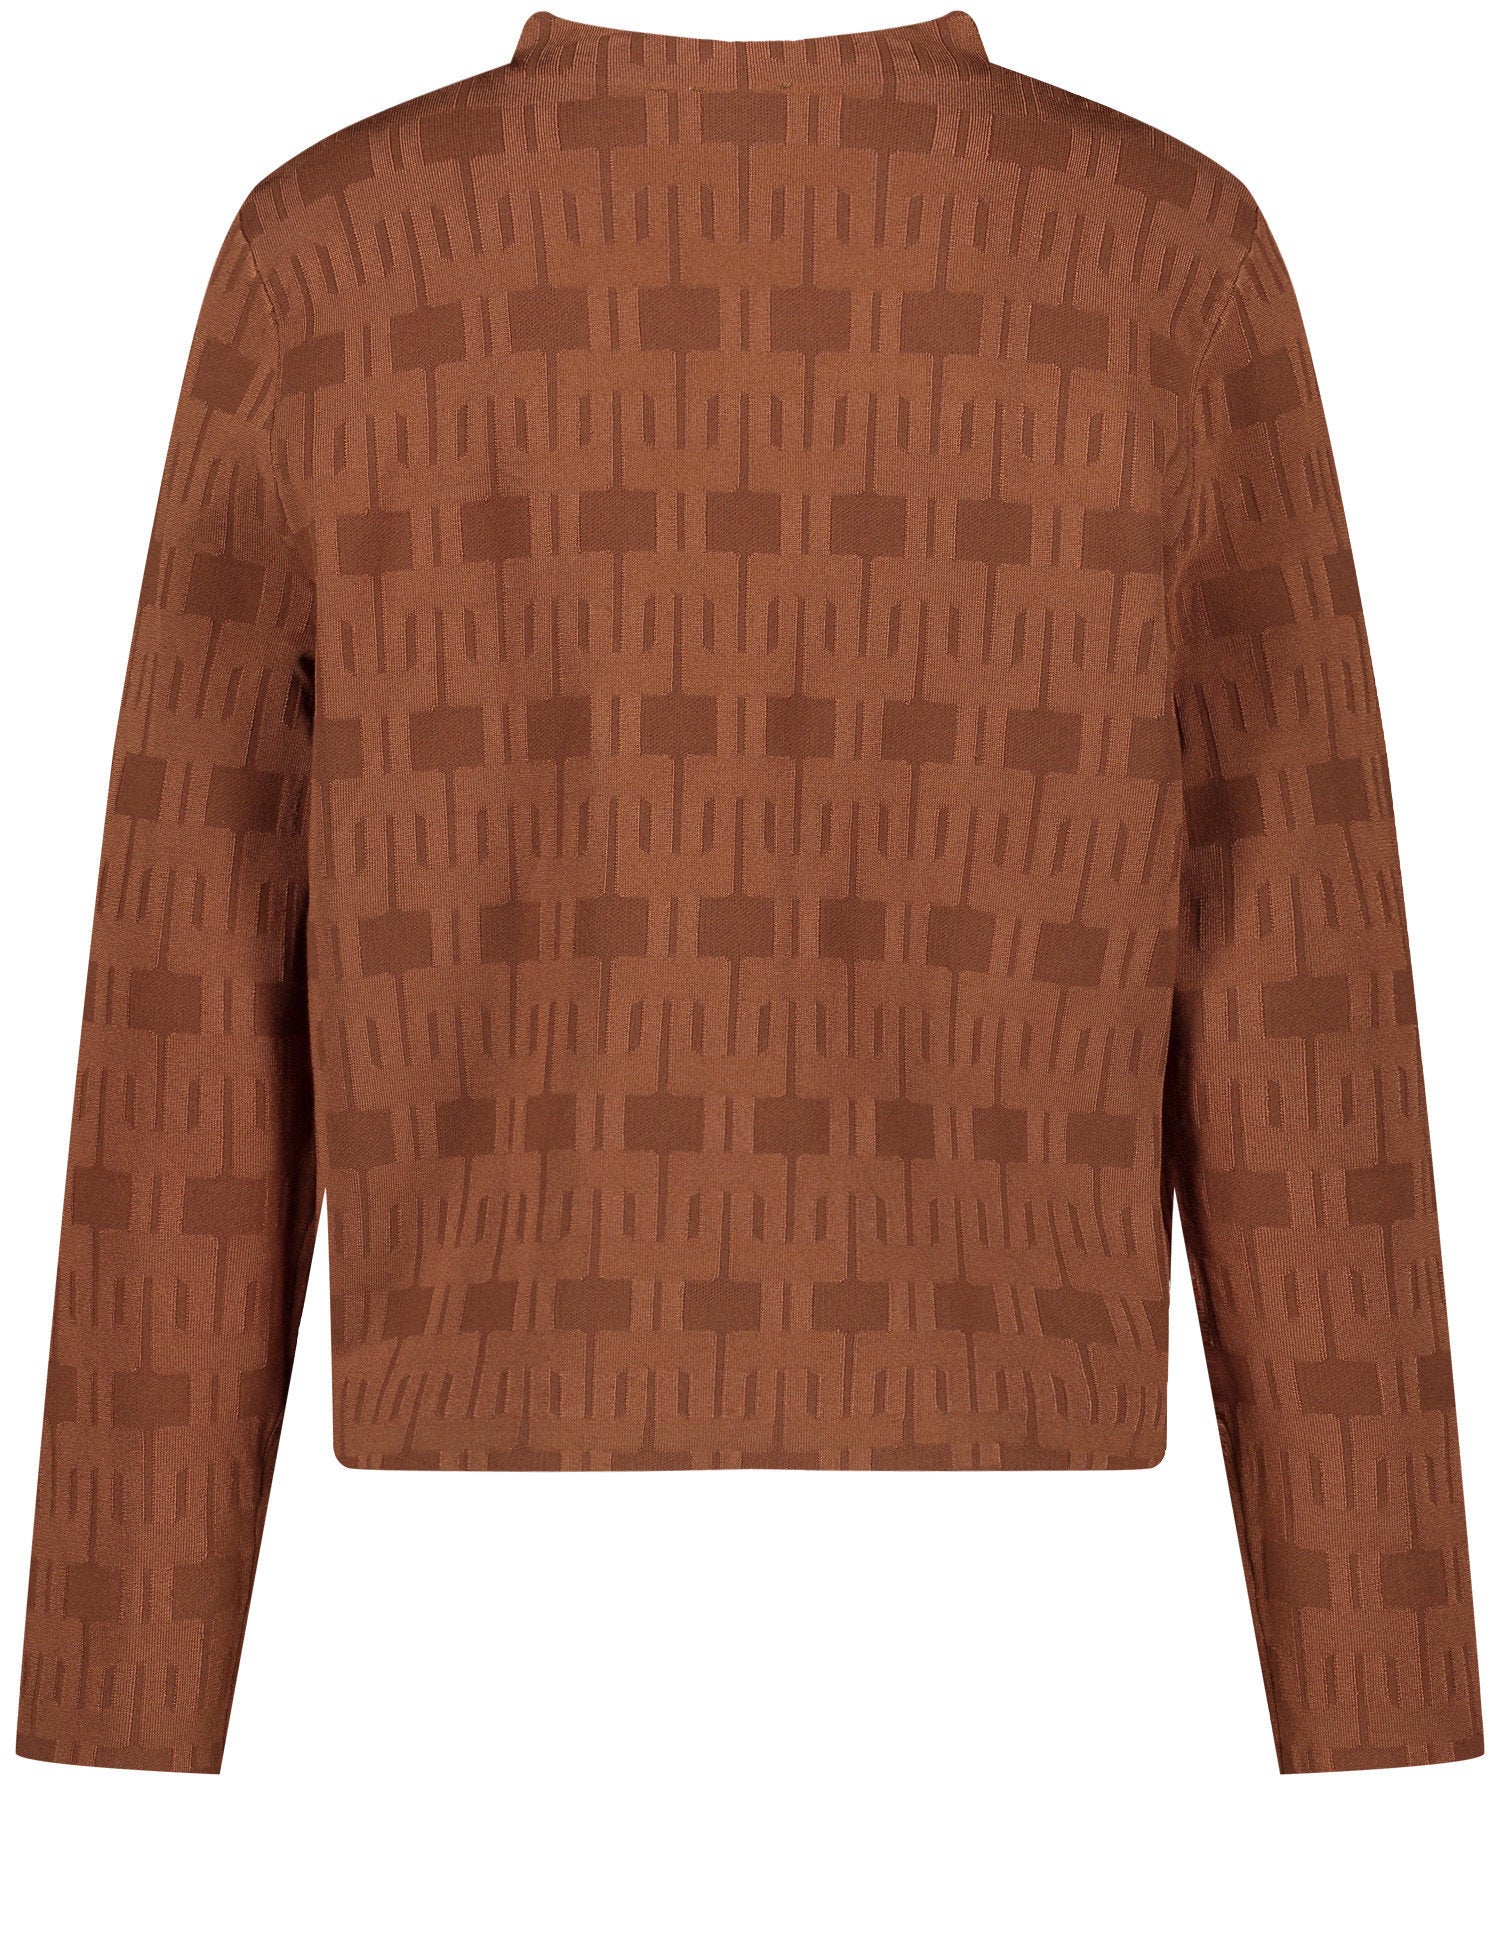 Jumper With A Short Stand Up Collar And A Jacquard Pattern_271022-35719_60703_03